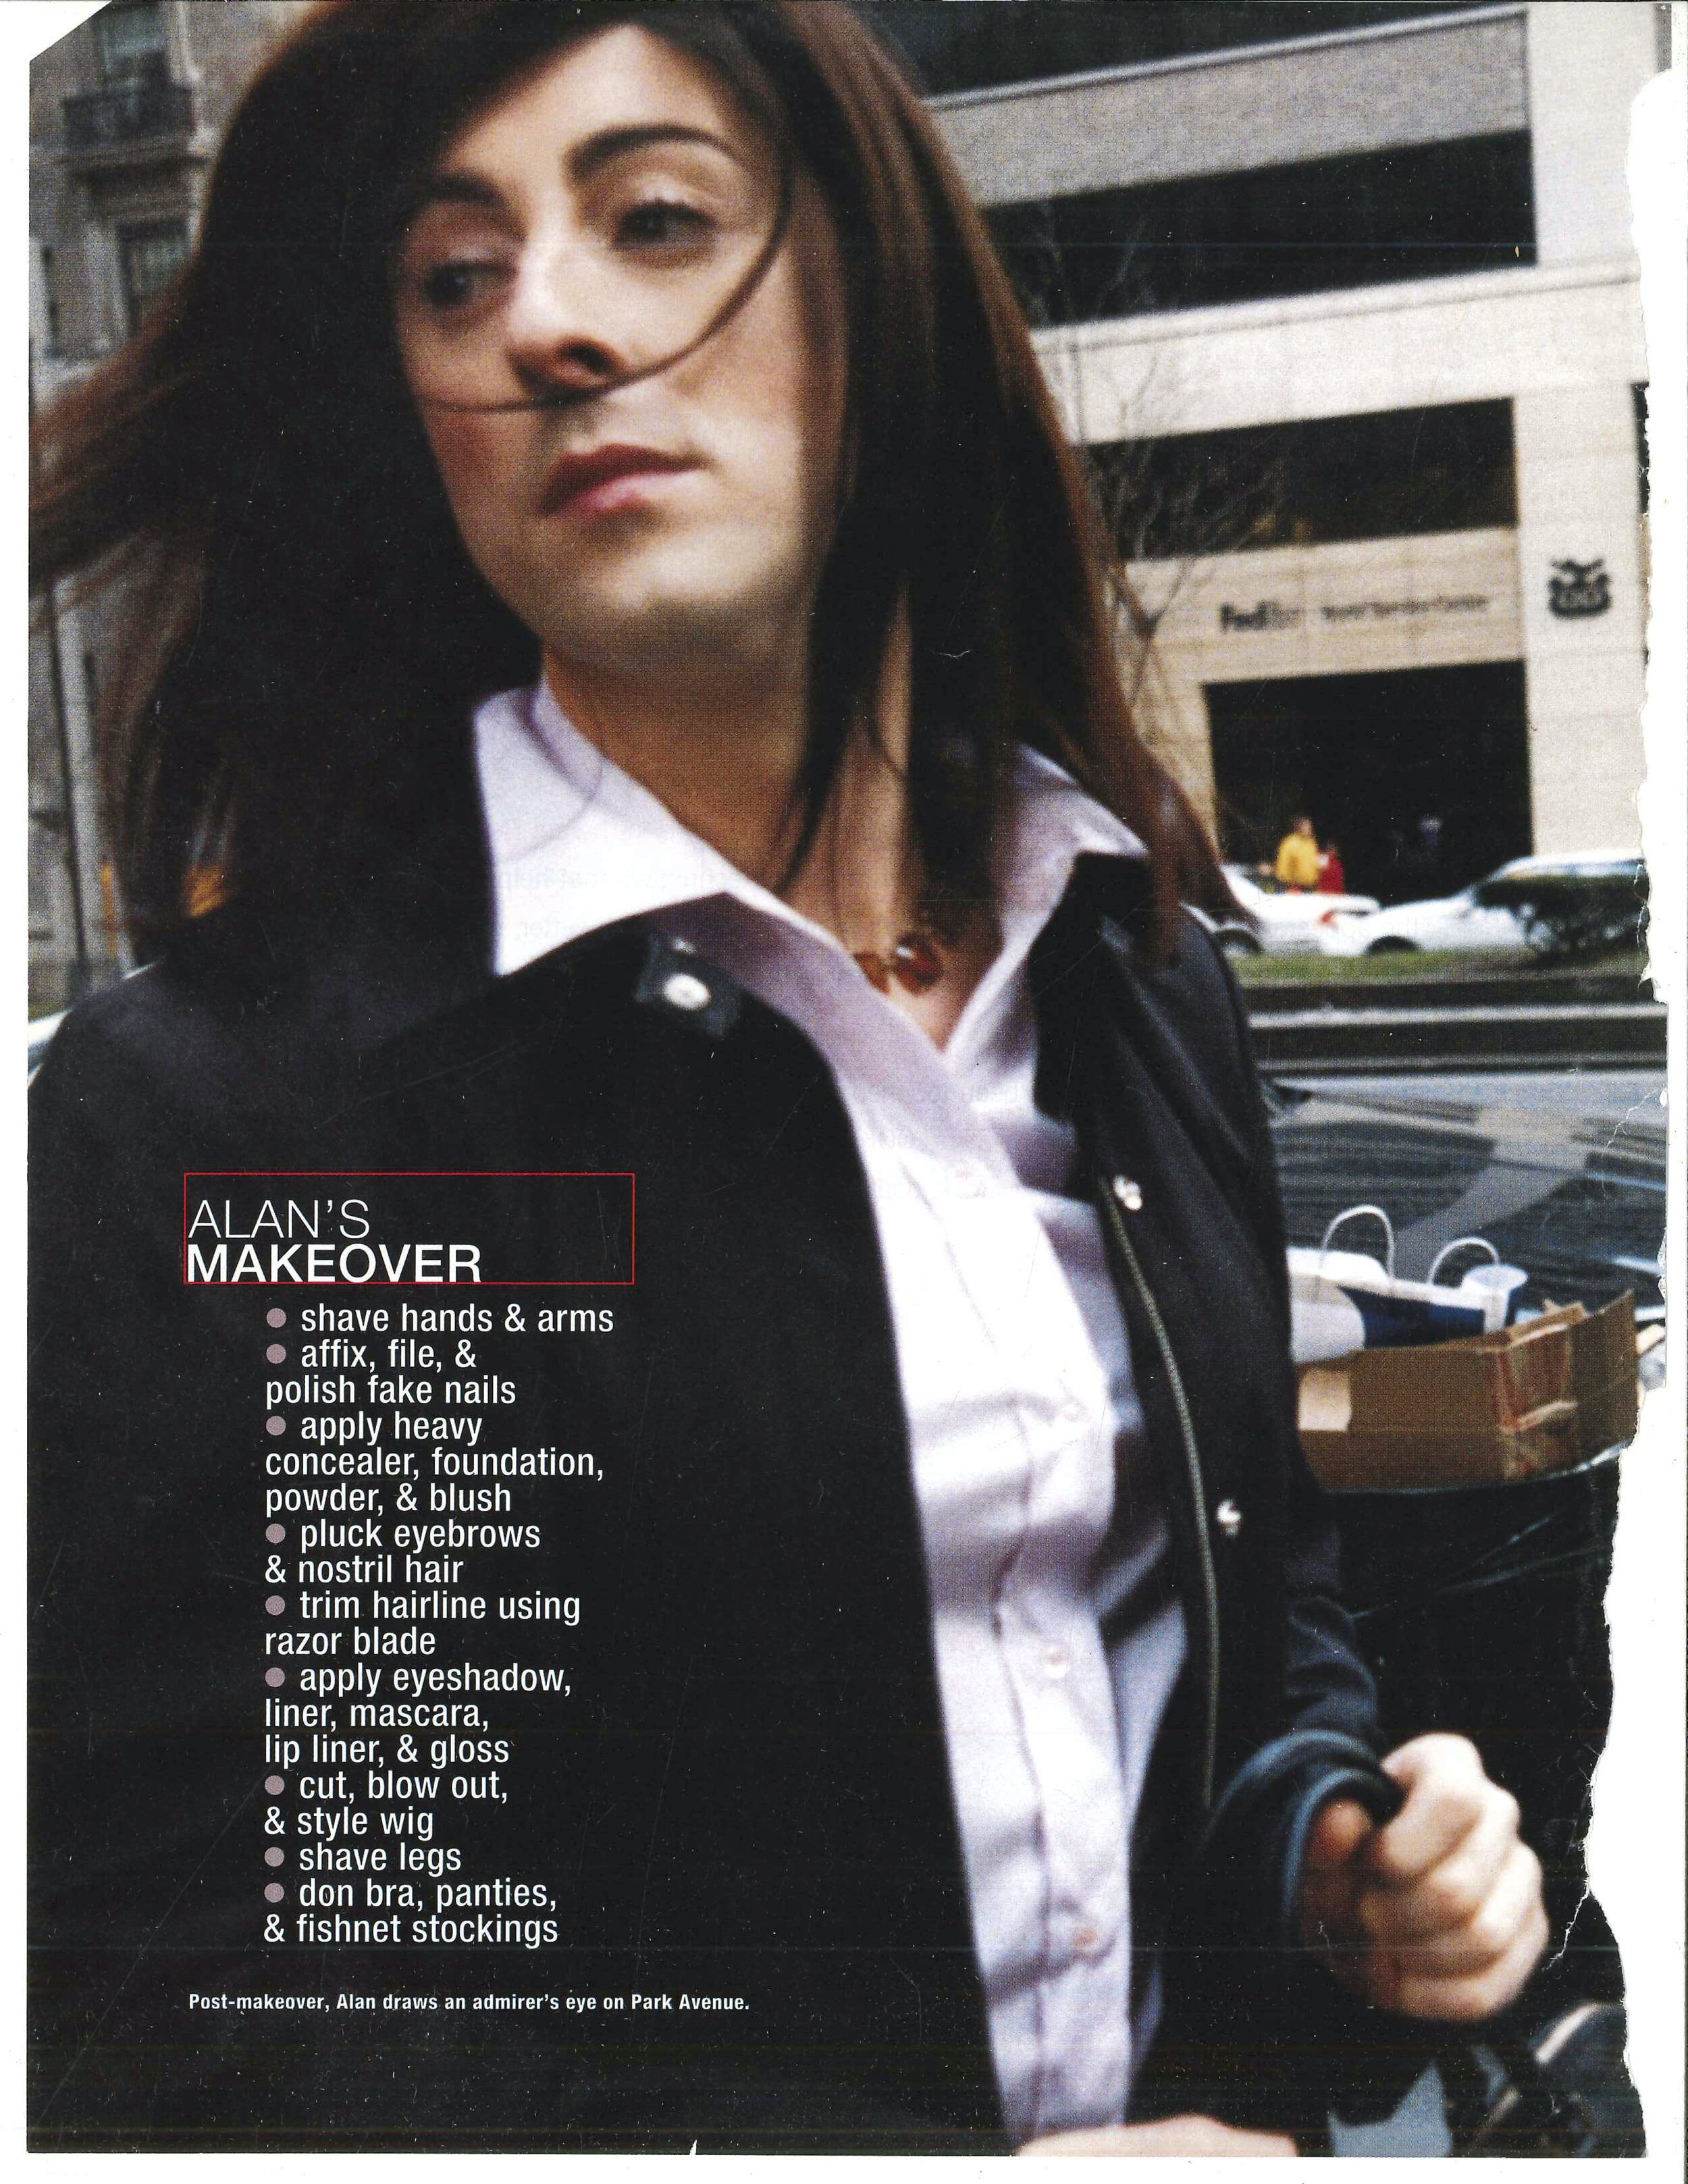 Marie Claire - Page 3 - 2001.jpg